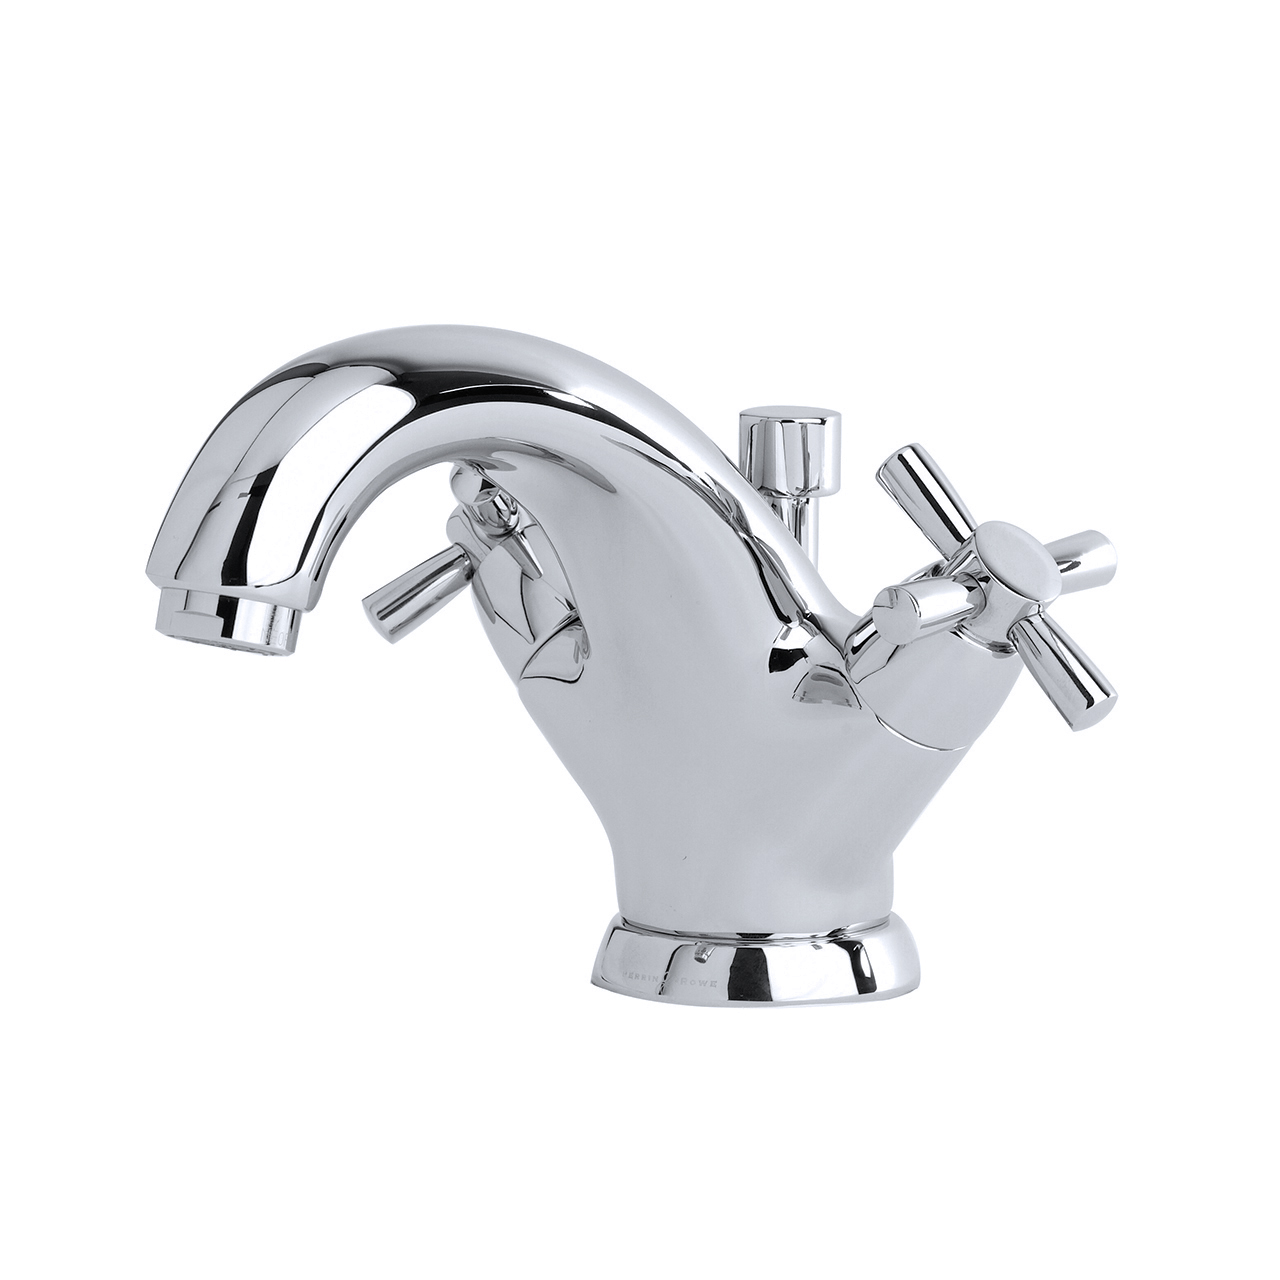 Perrin & Rowe - Contemporary wall mounted soap dispenser